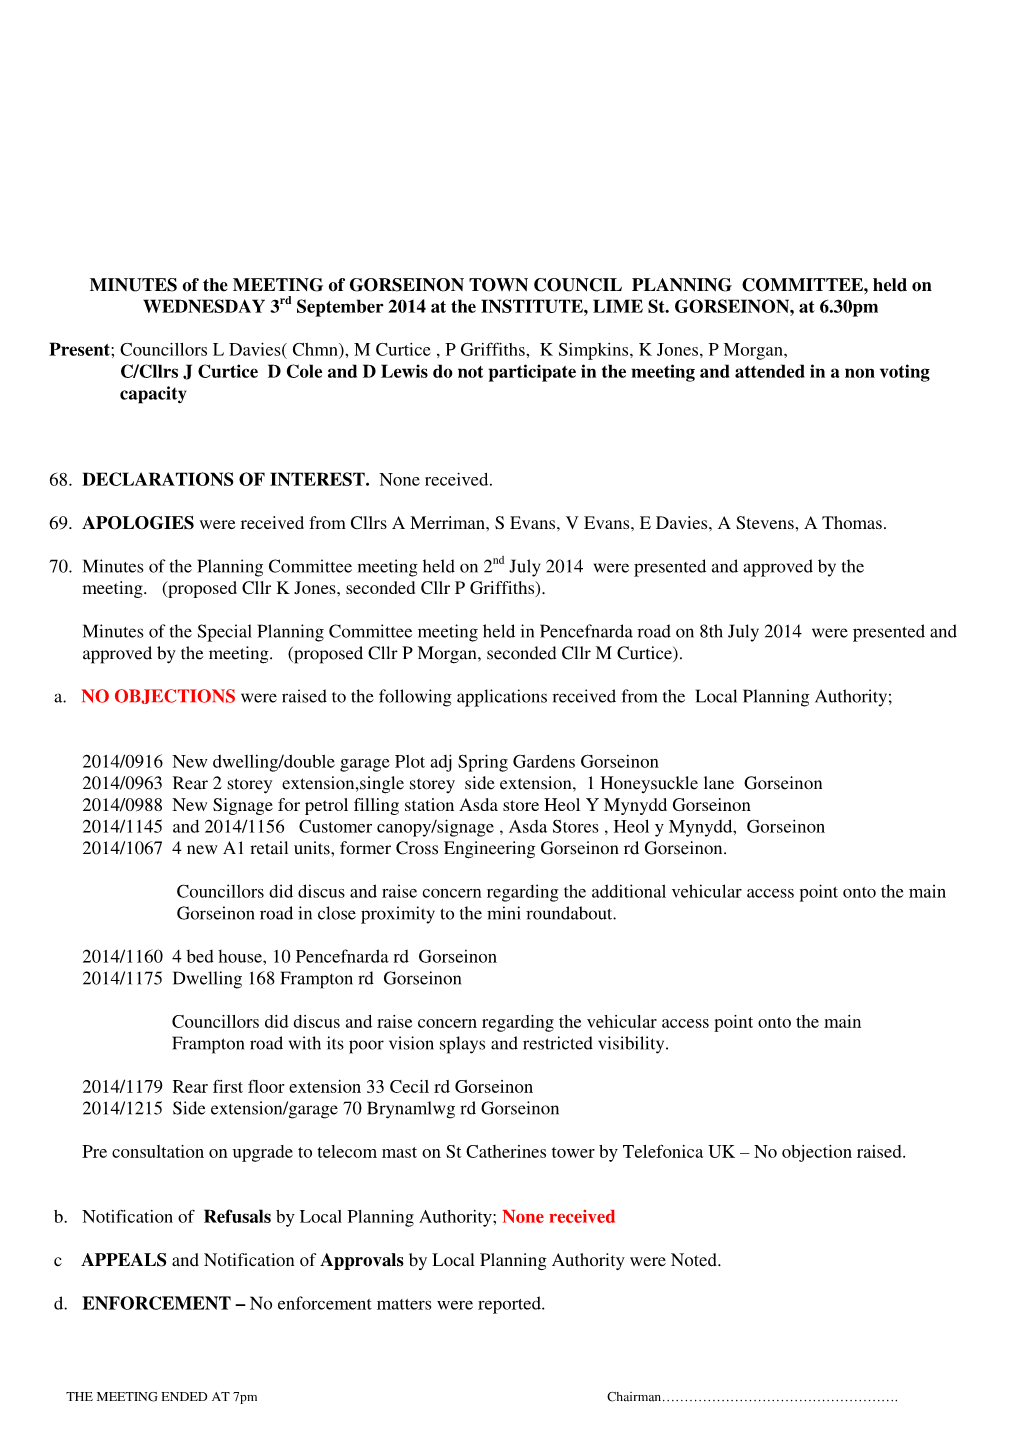 MINUTES of the MEETING of GORSEINON TOWN COUNCIL PLANNING COMMITTEE, Held on WEDNESDAY 3Rd September 2014 at the INSTITUTE, LIME St